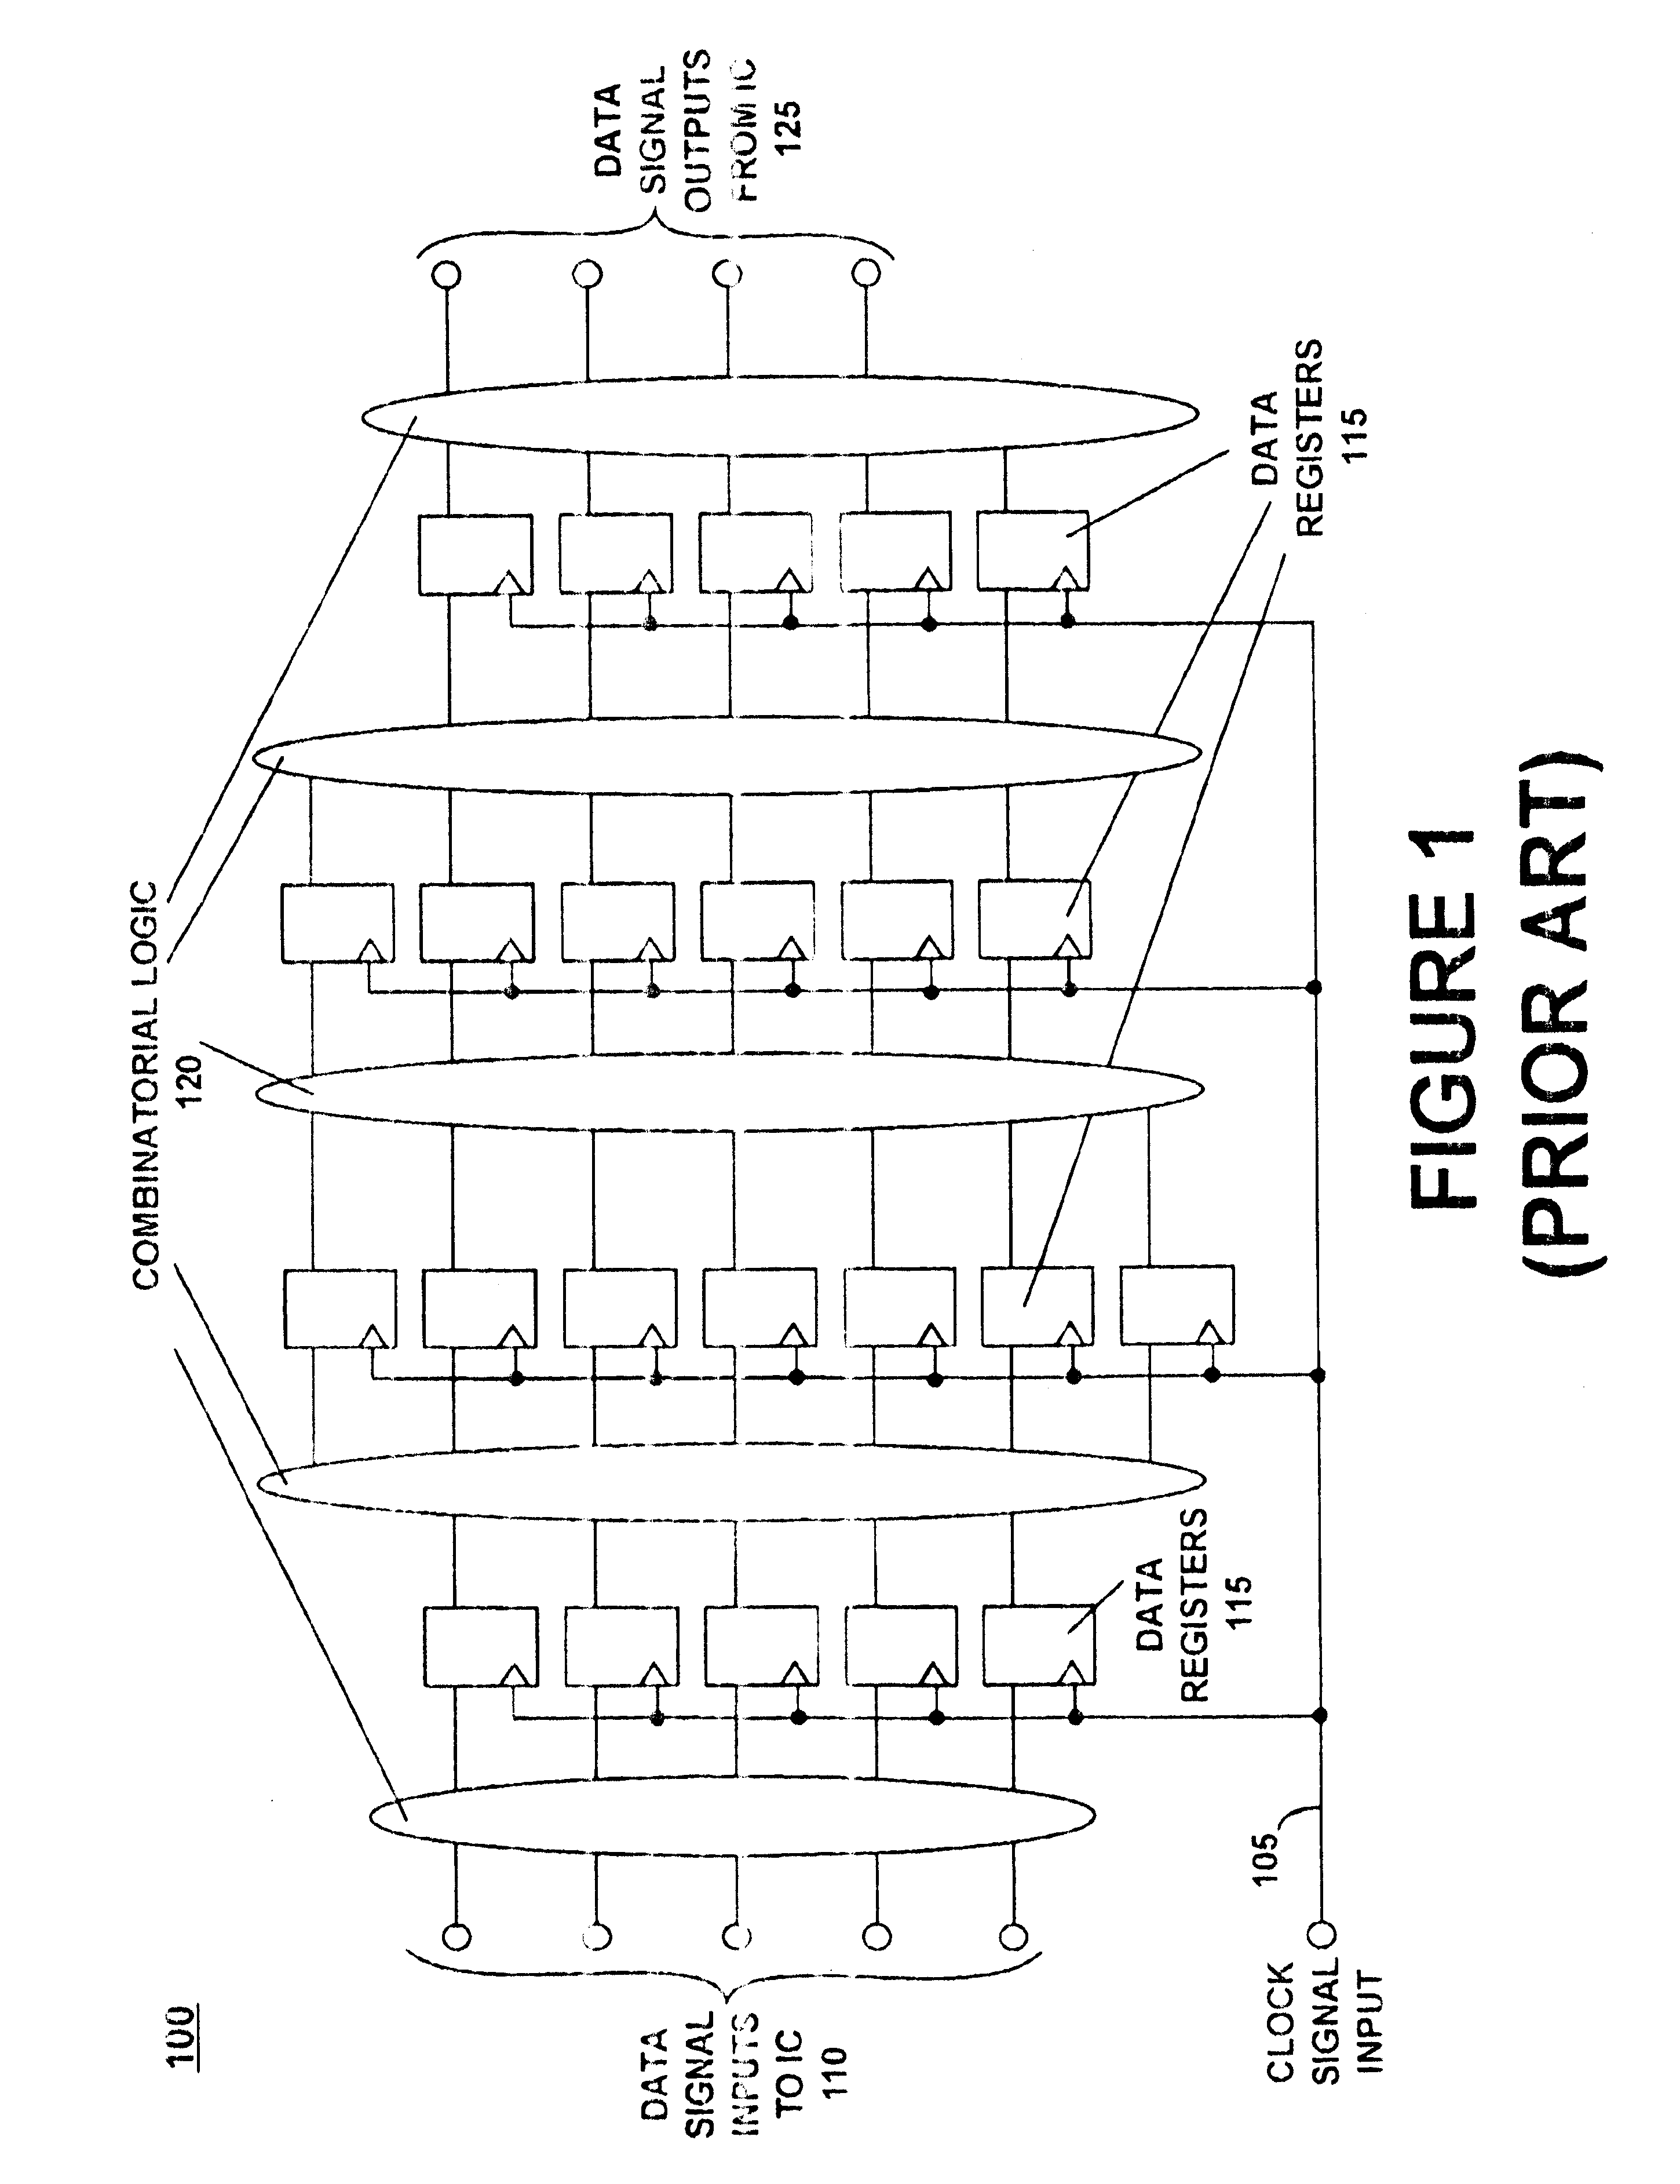 Dynamically reconfigurable precision signal delay test system for automatic test equipment